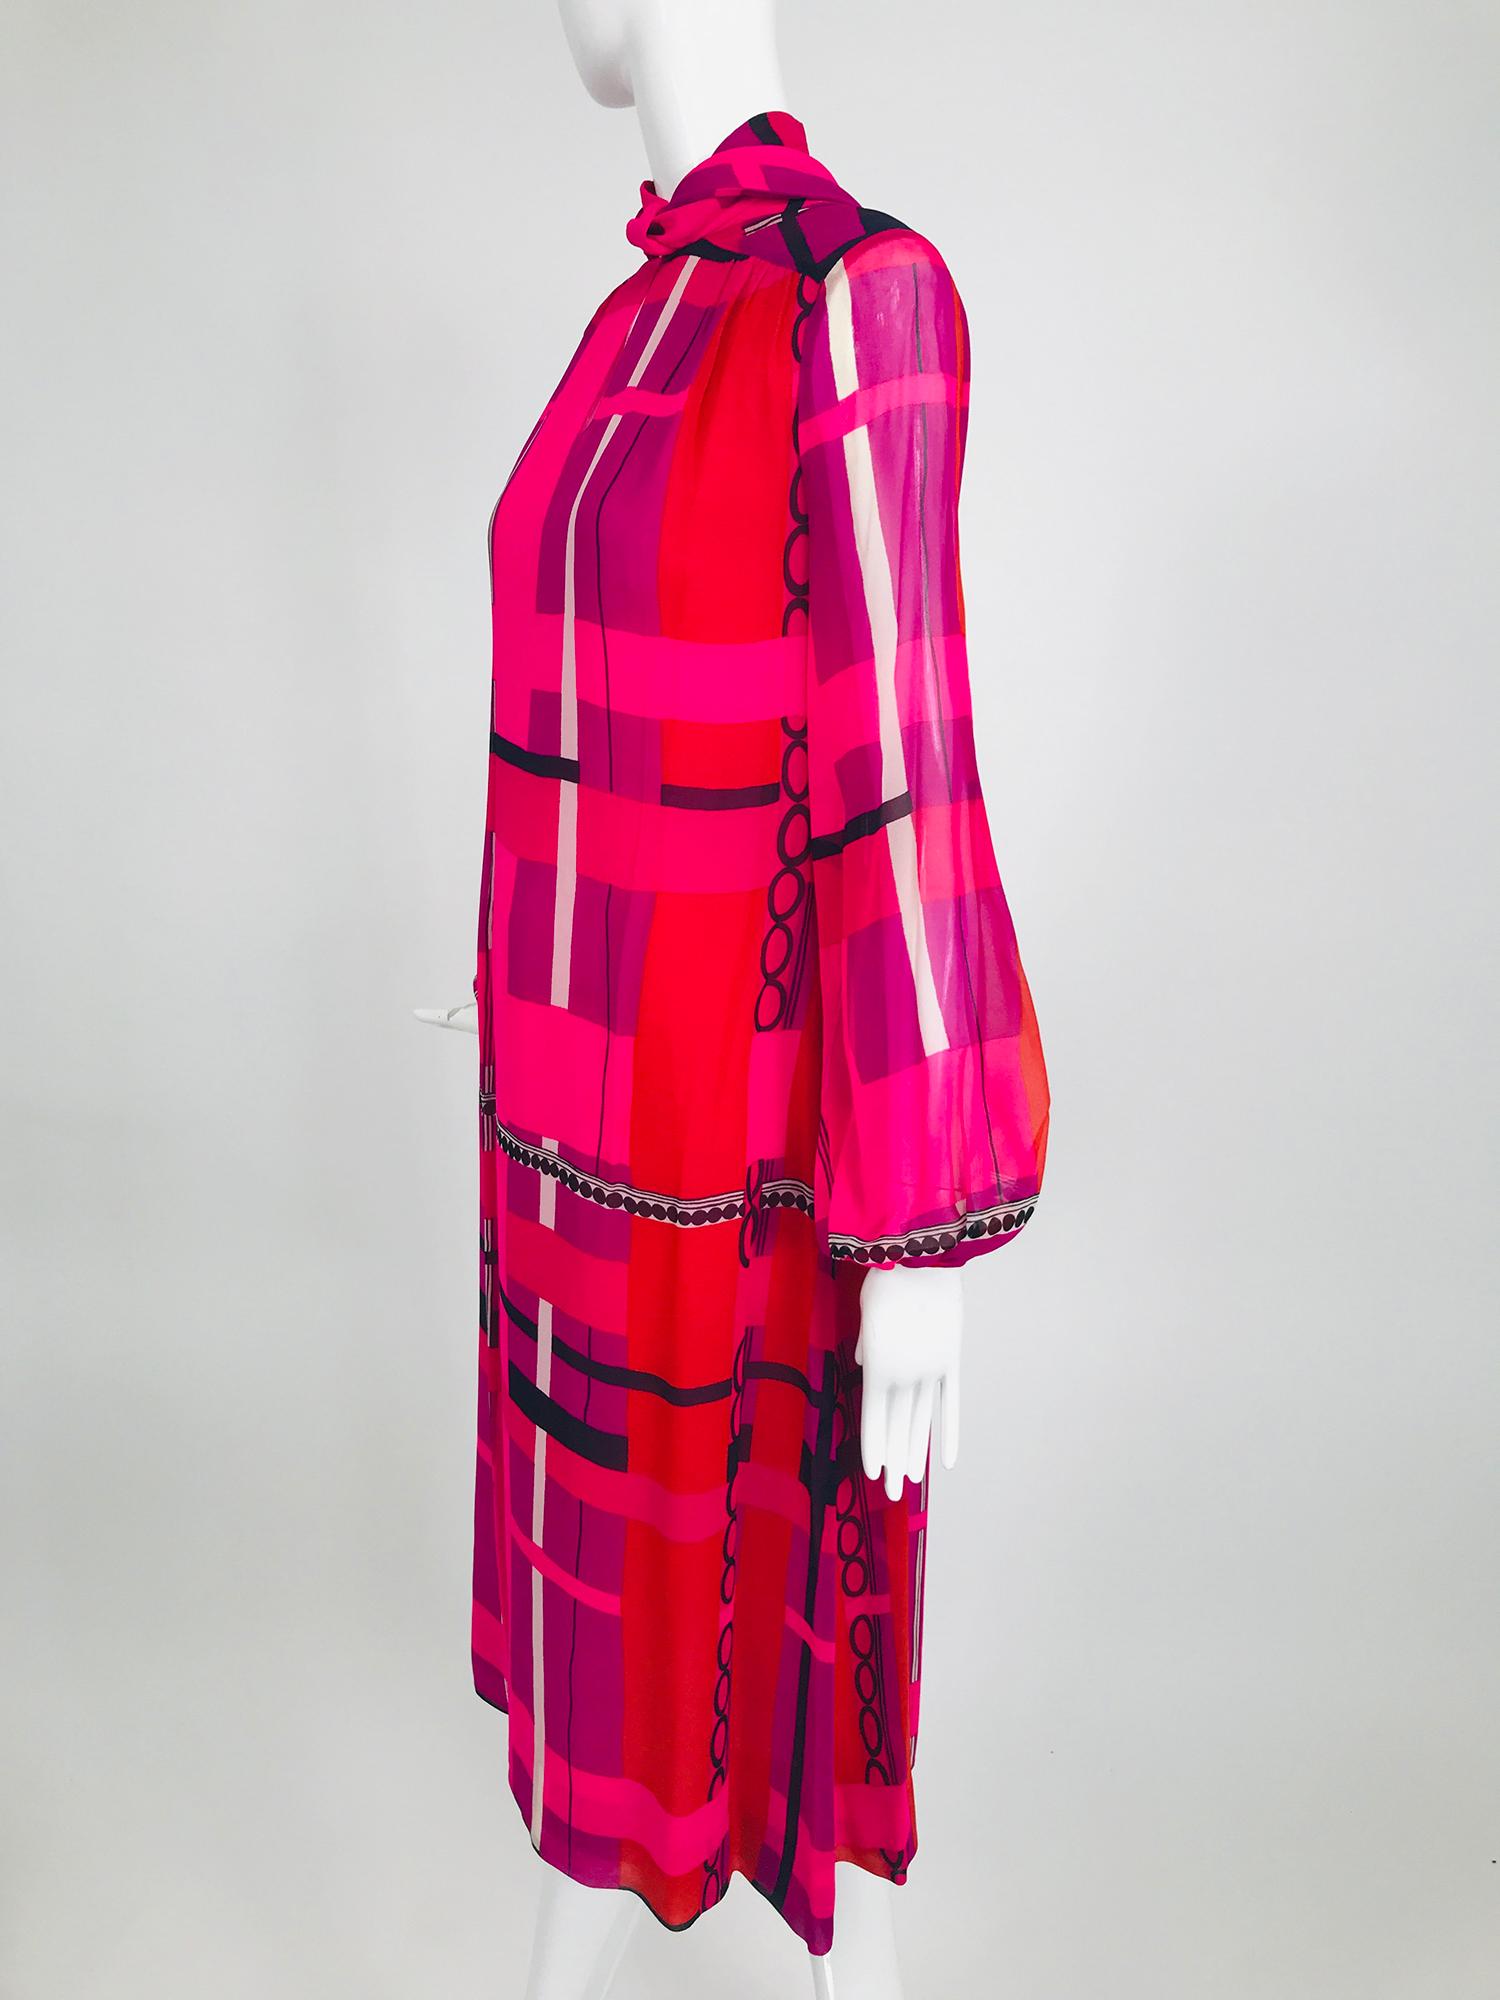 La Mendola couture hot pink, orange, black & white silk chiffon modernist print dress from the 1970s. This bold and bright dress is perfect for any special occasion. The chiffon dress is lined in hot pink rayon, all hand made. The dress has attached